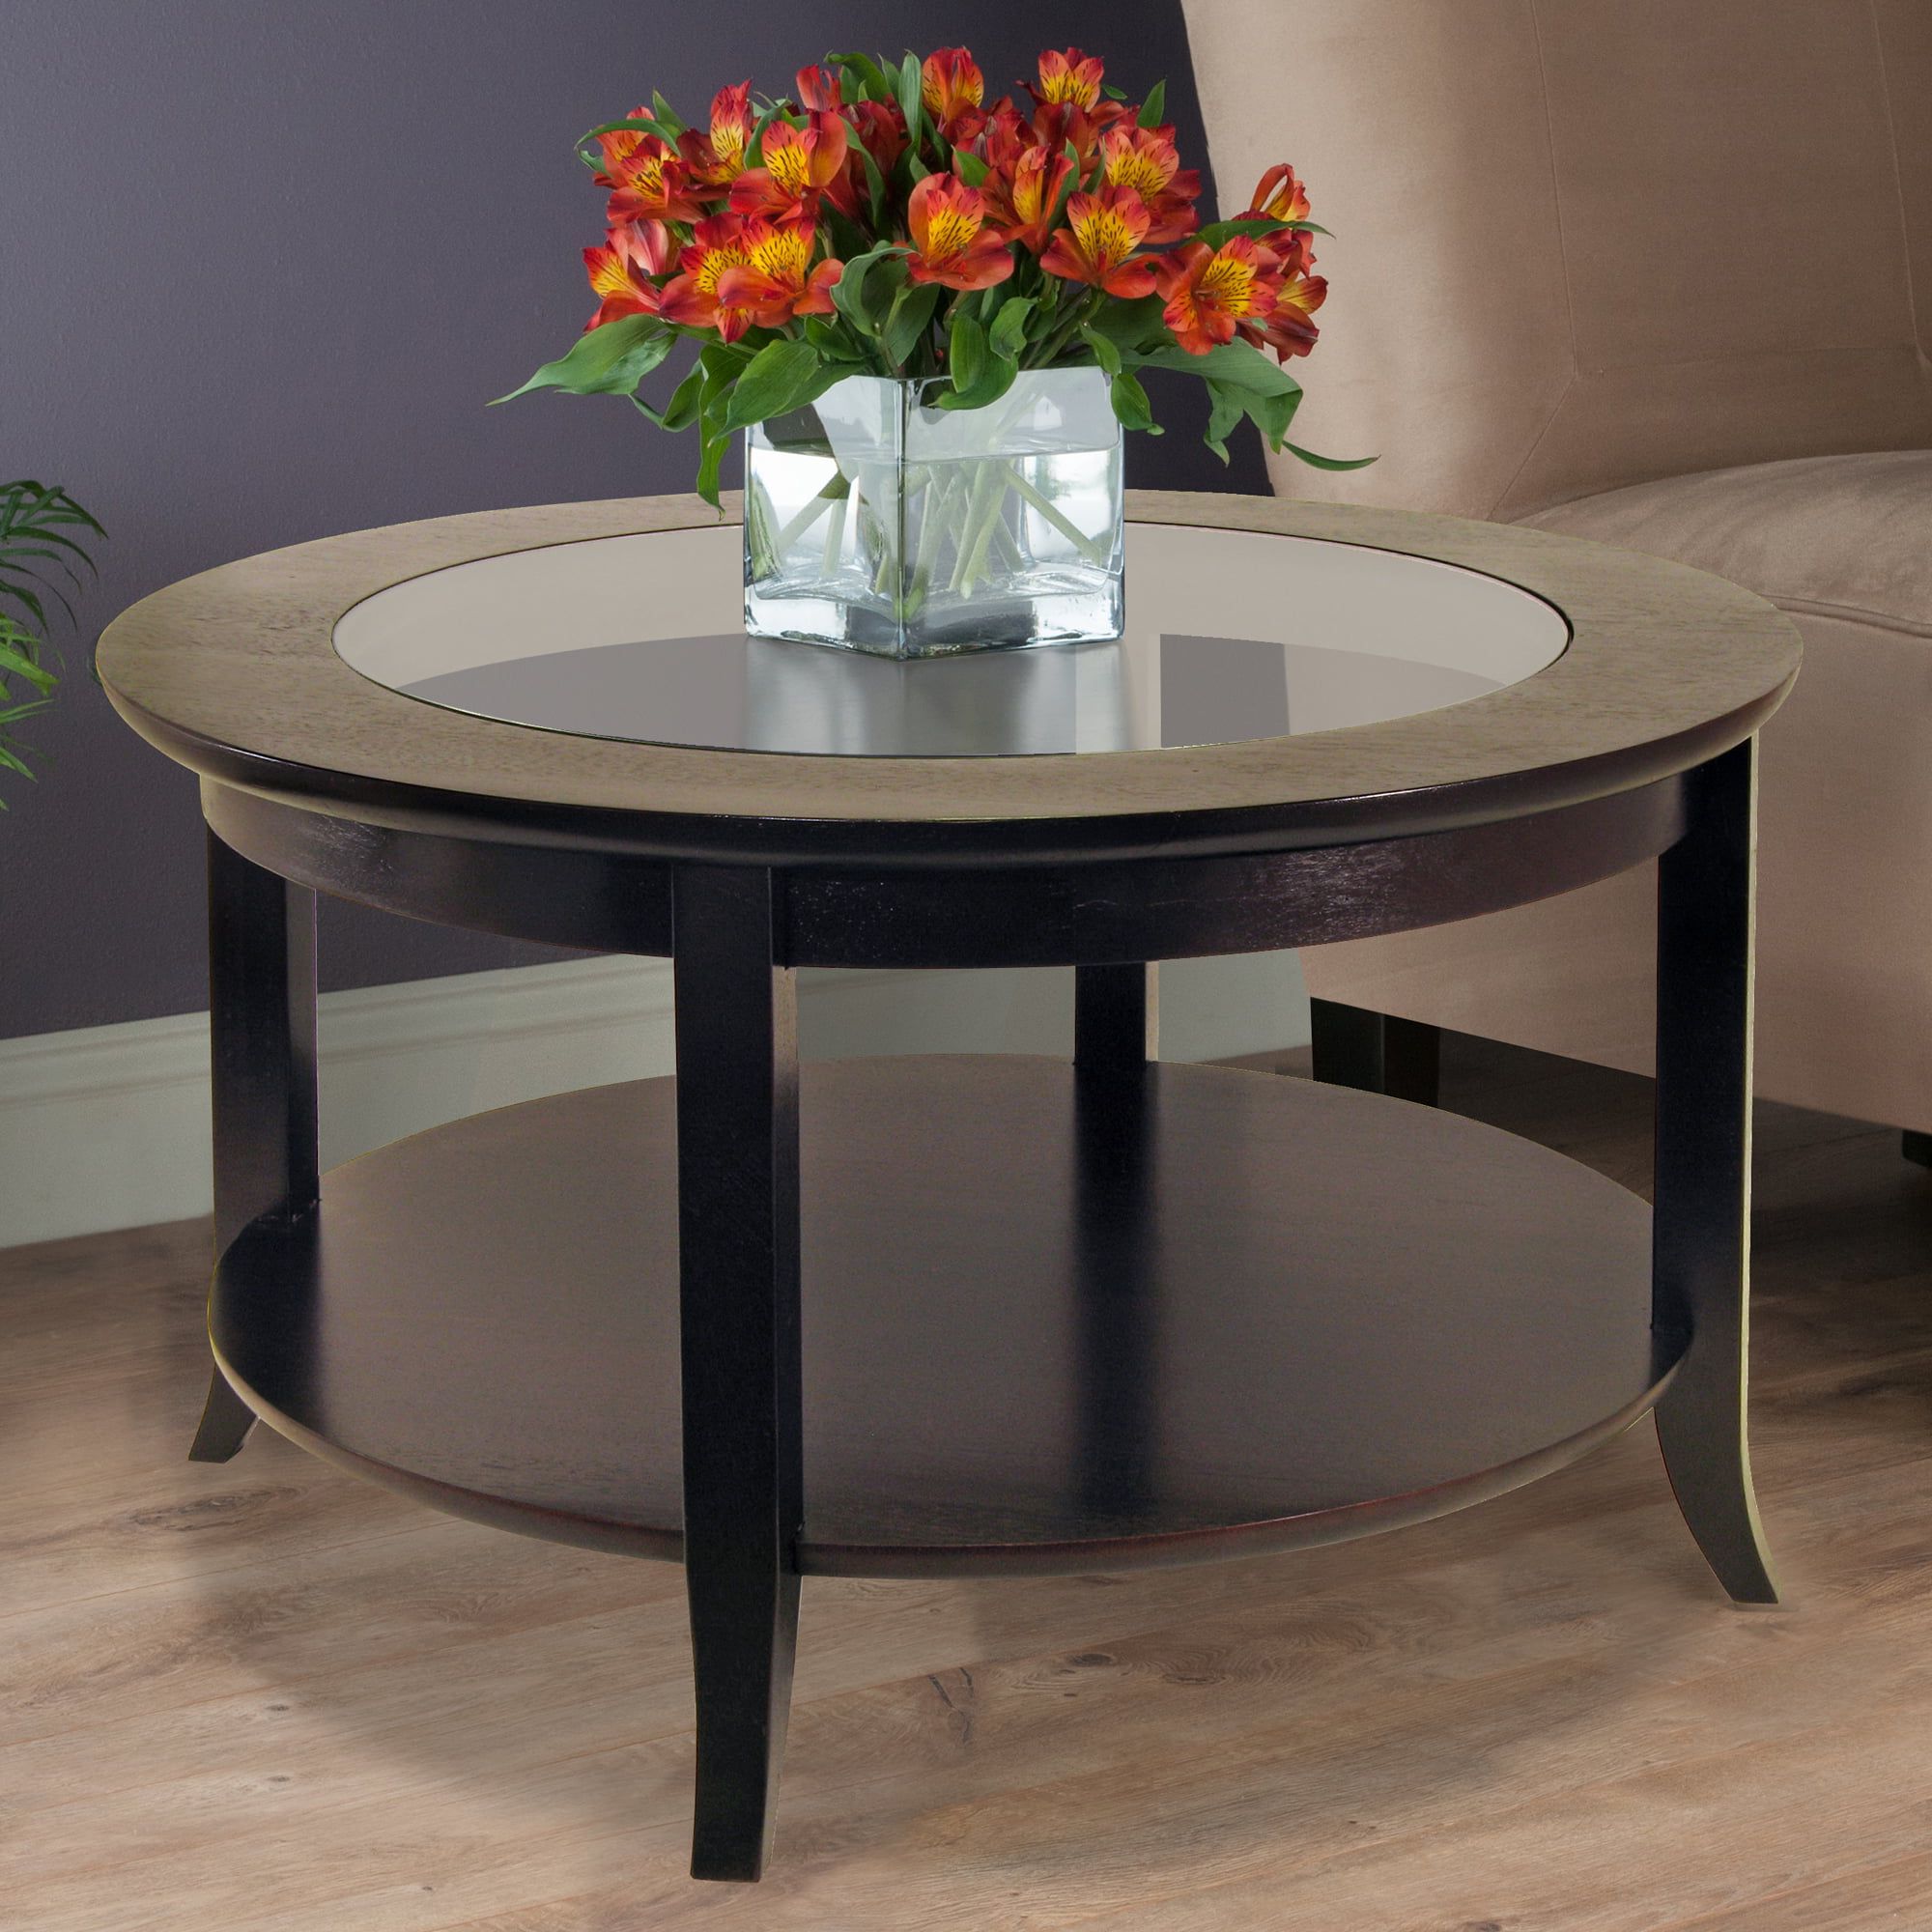 Winsome Wood Genoa Round Coffee Table With Glass Top, Espresso Finish Within Espresso Wood Finish Coffee Tables (Gallery 1 of 20)